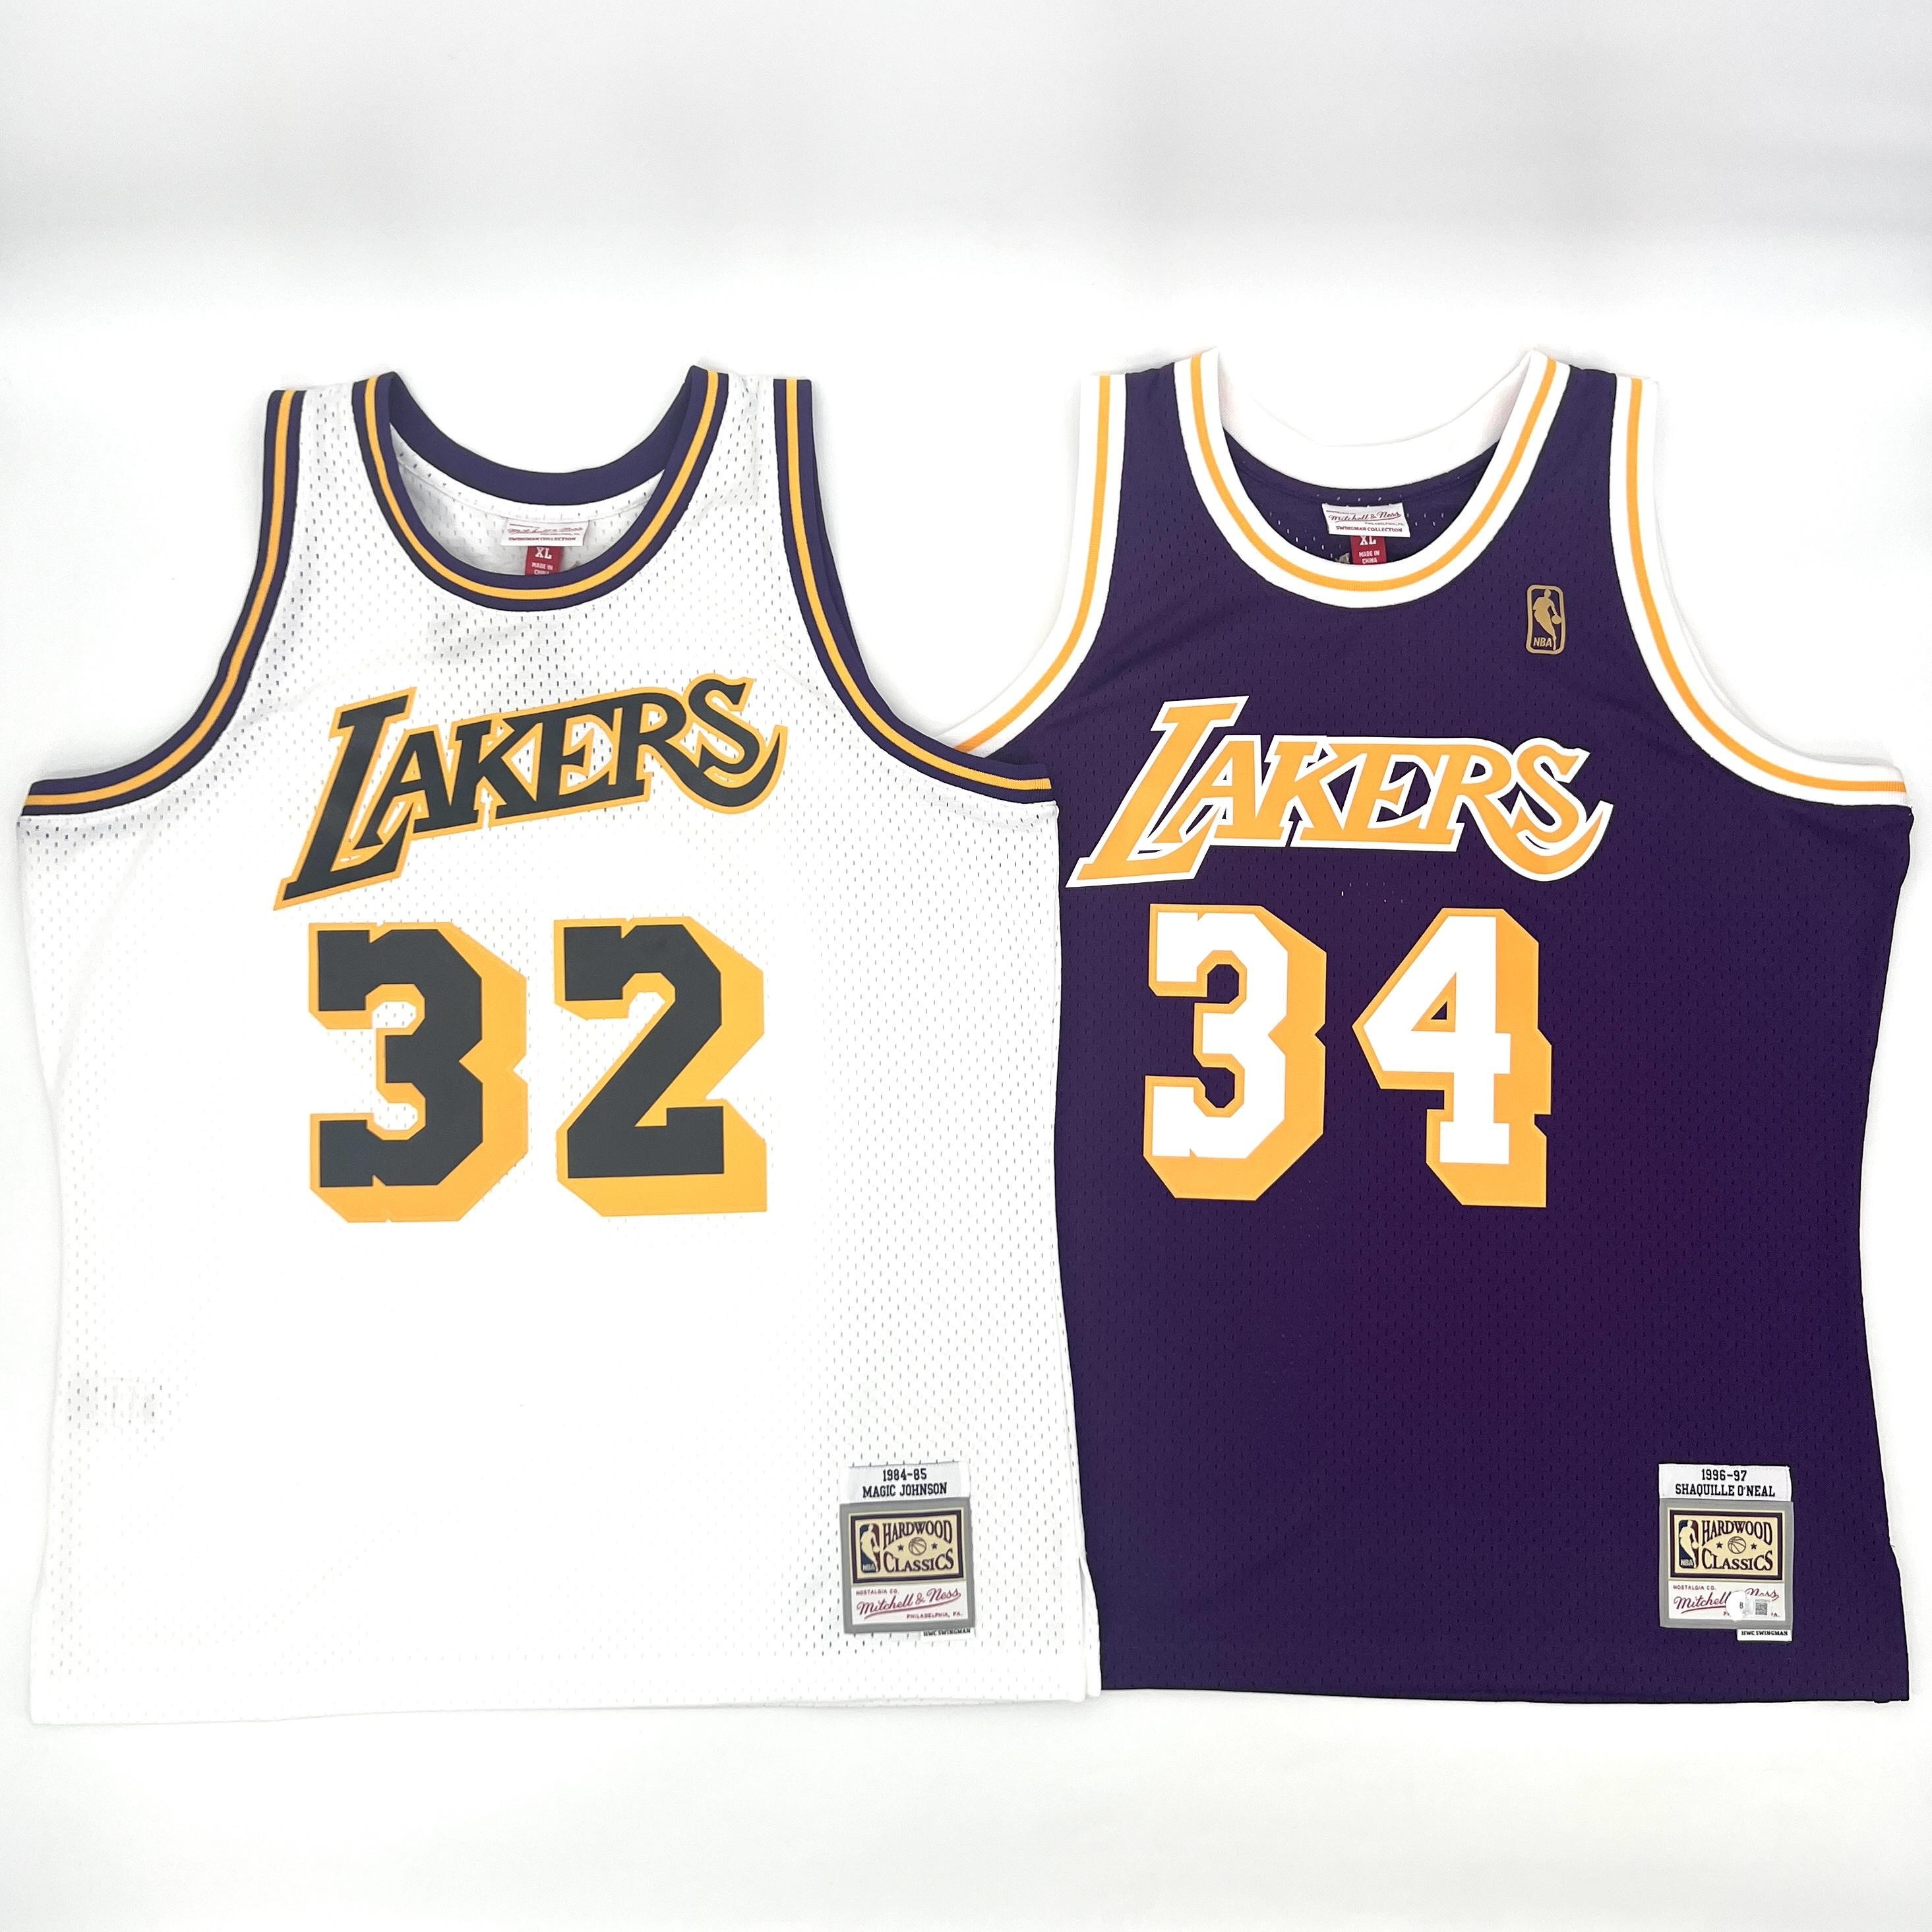 Shaquille O'Neal Signed Los Angeles Lakers Mitchell & Ness Black NBA  Swingman Basketball Jersey - Schwartz Authentic